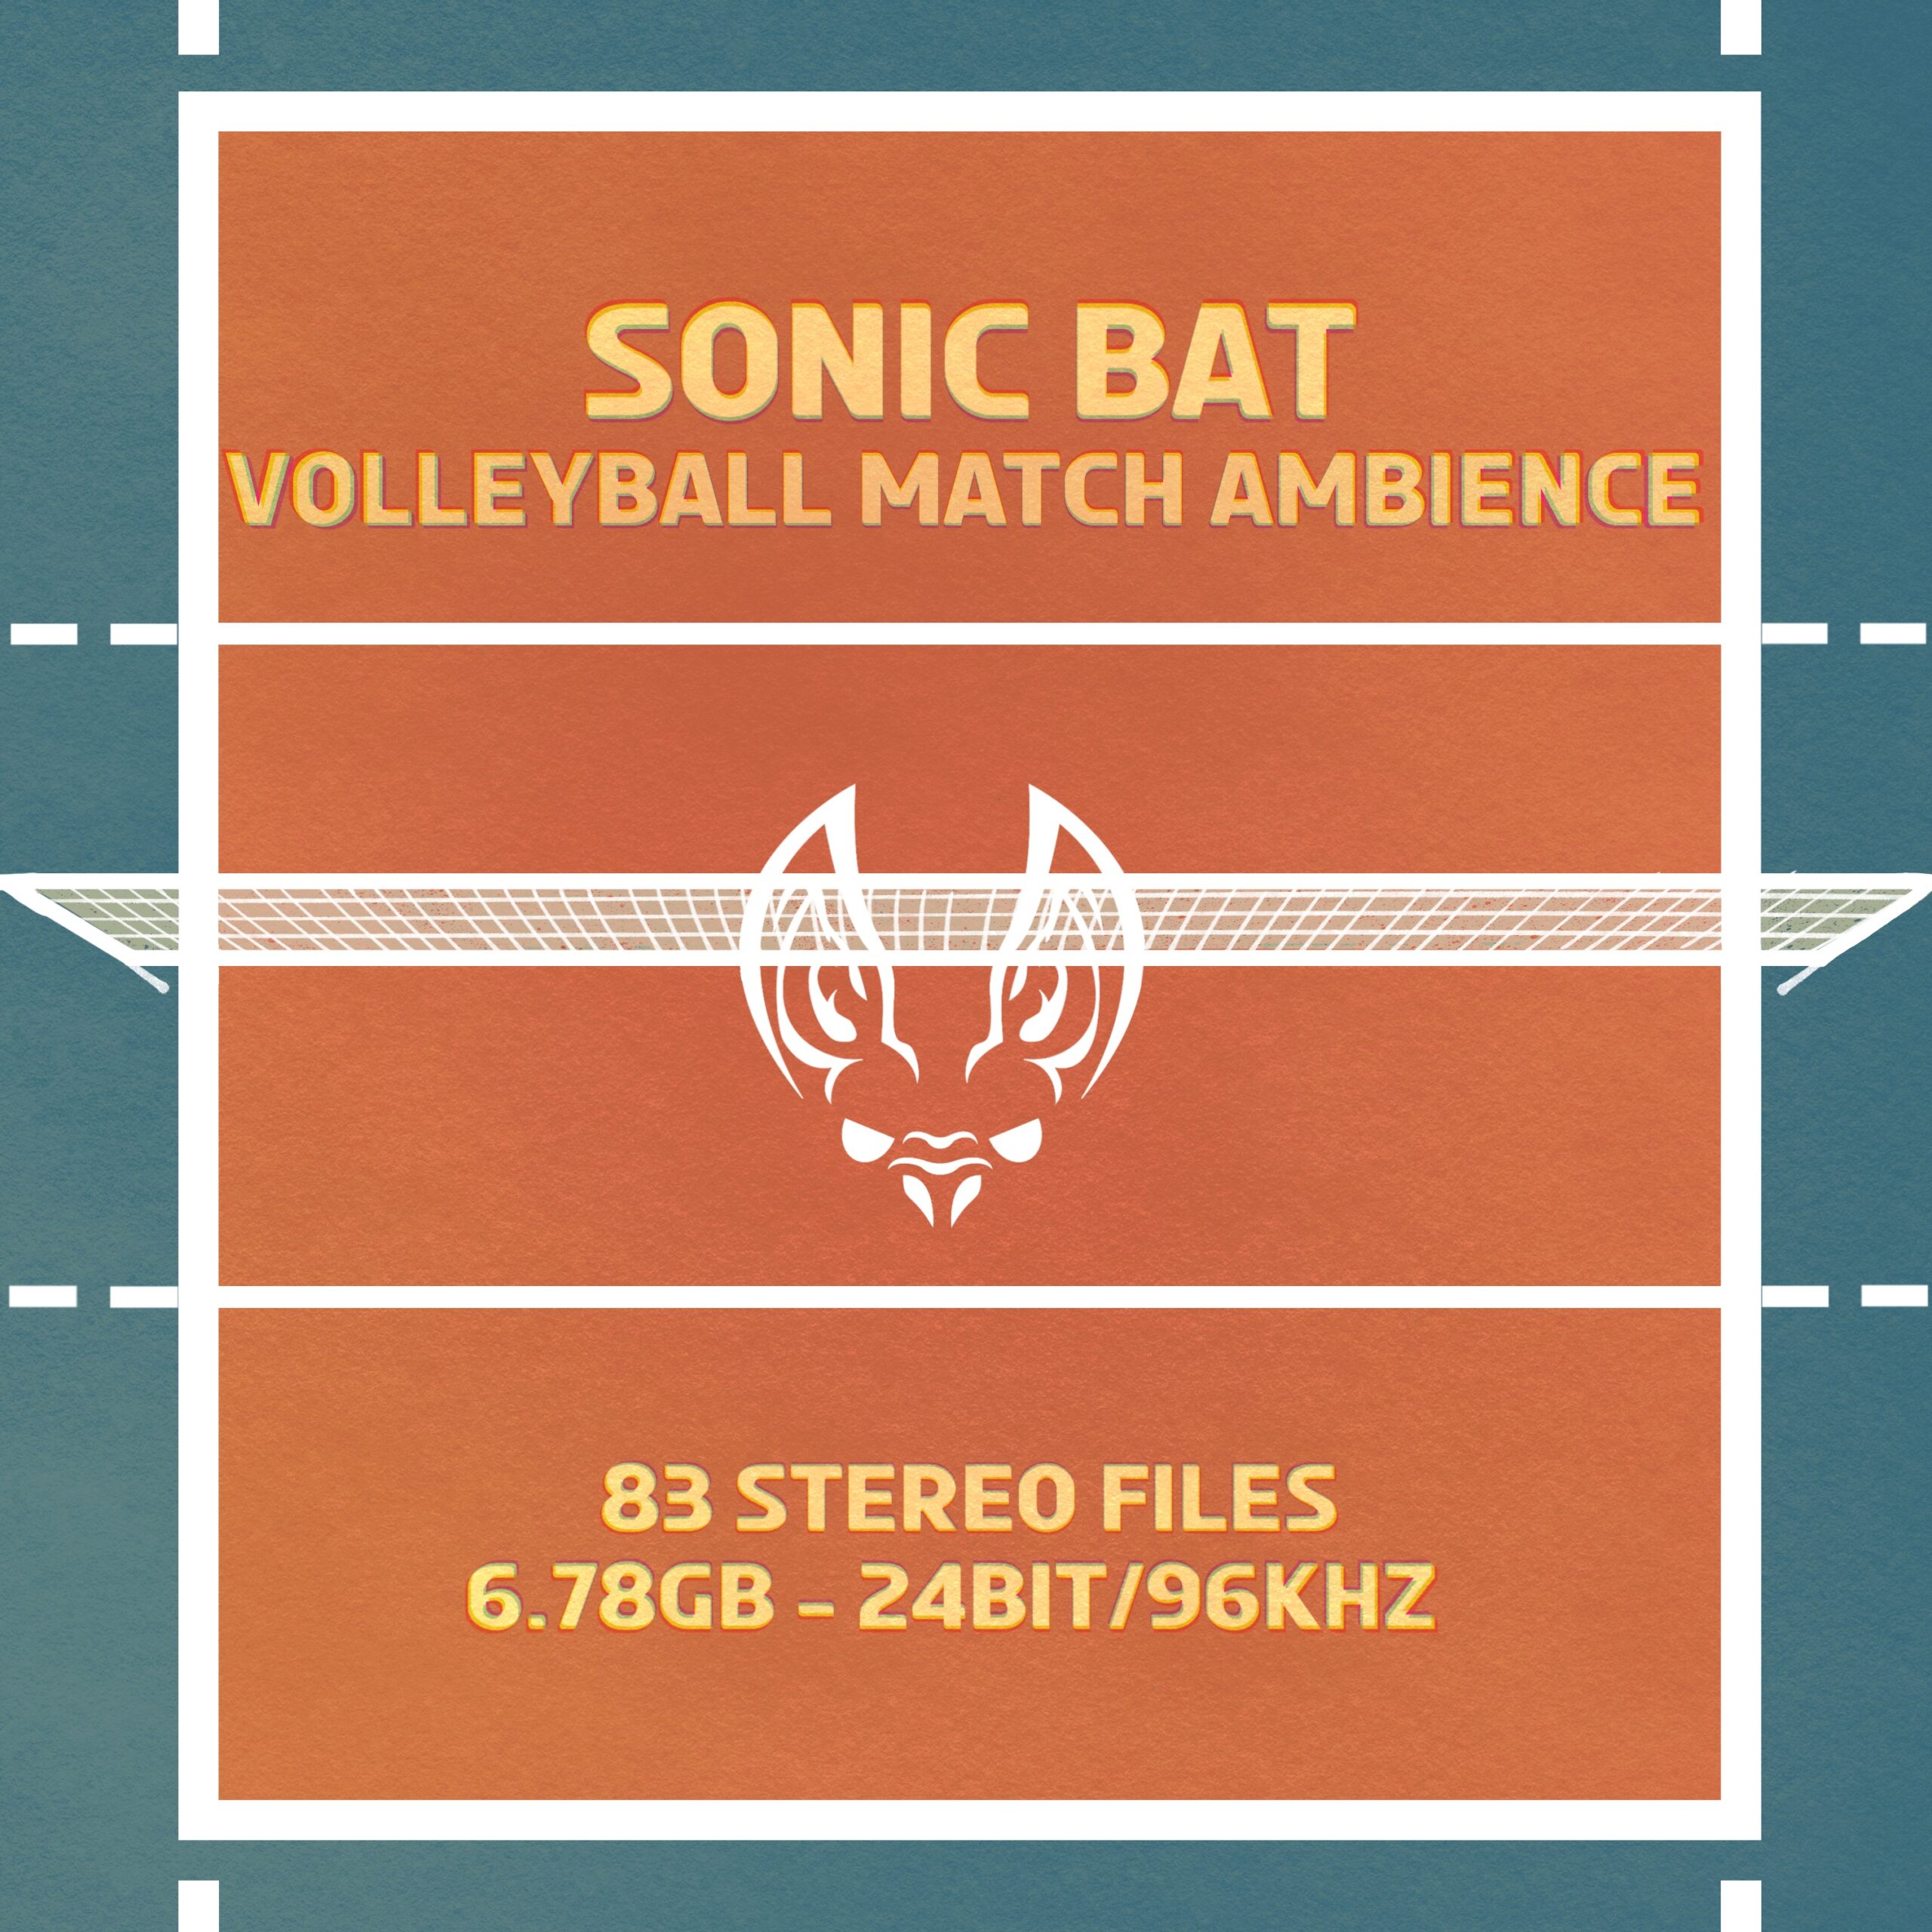 The image illustrates the sonic bat volleyball match ambience available in the sound effects library on Sonniss.